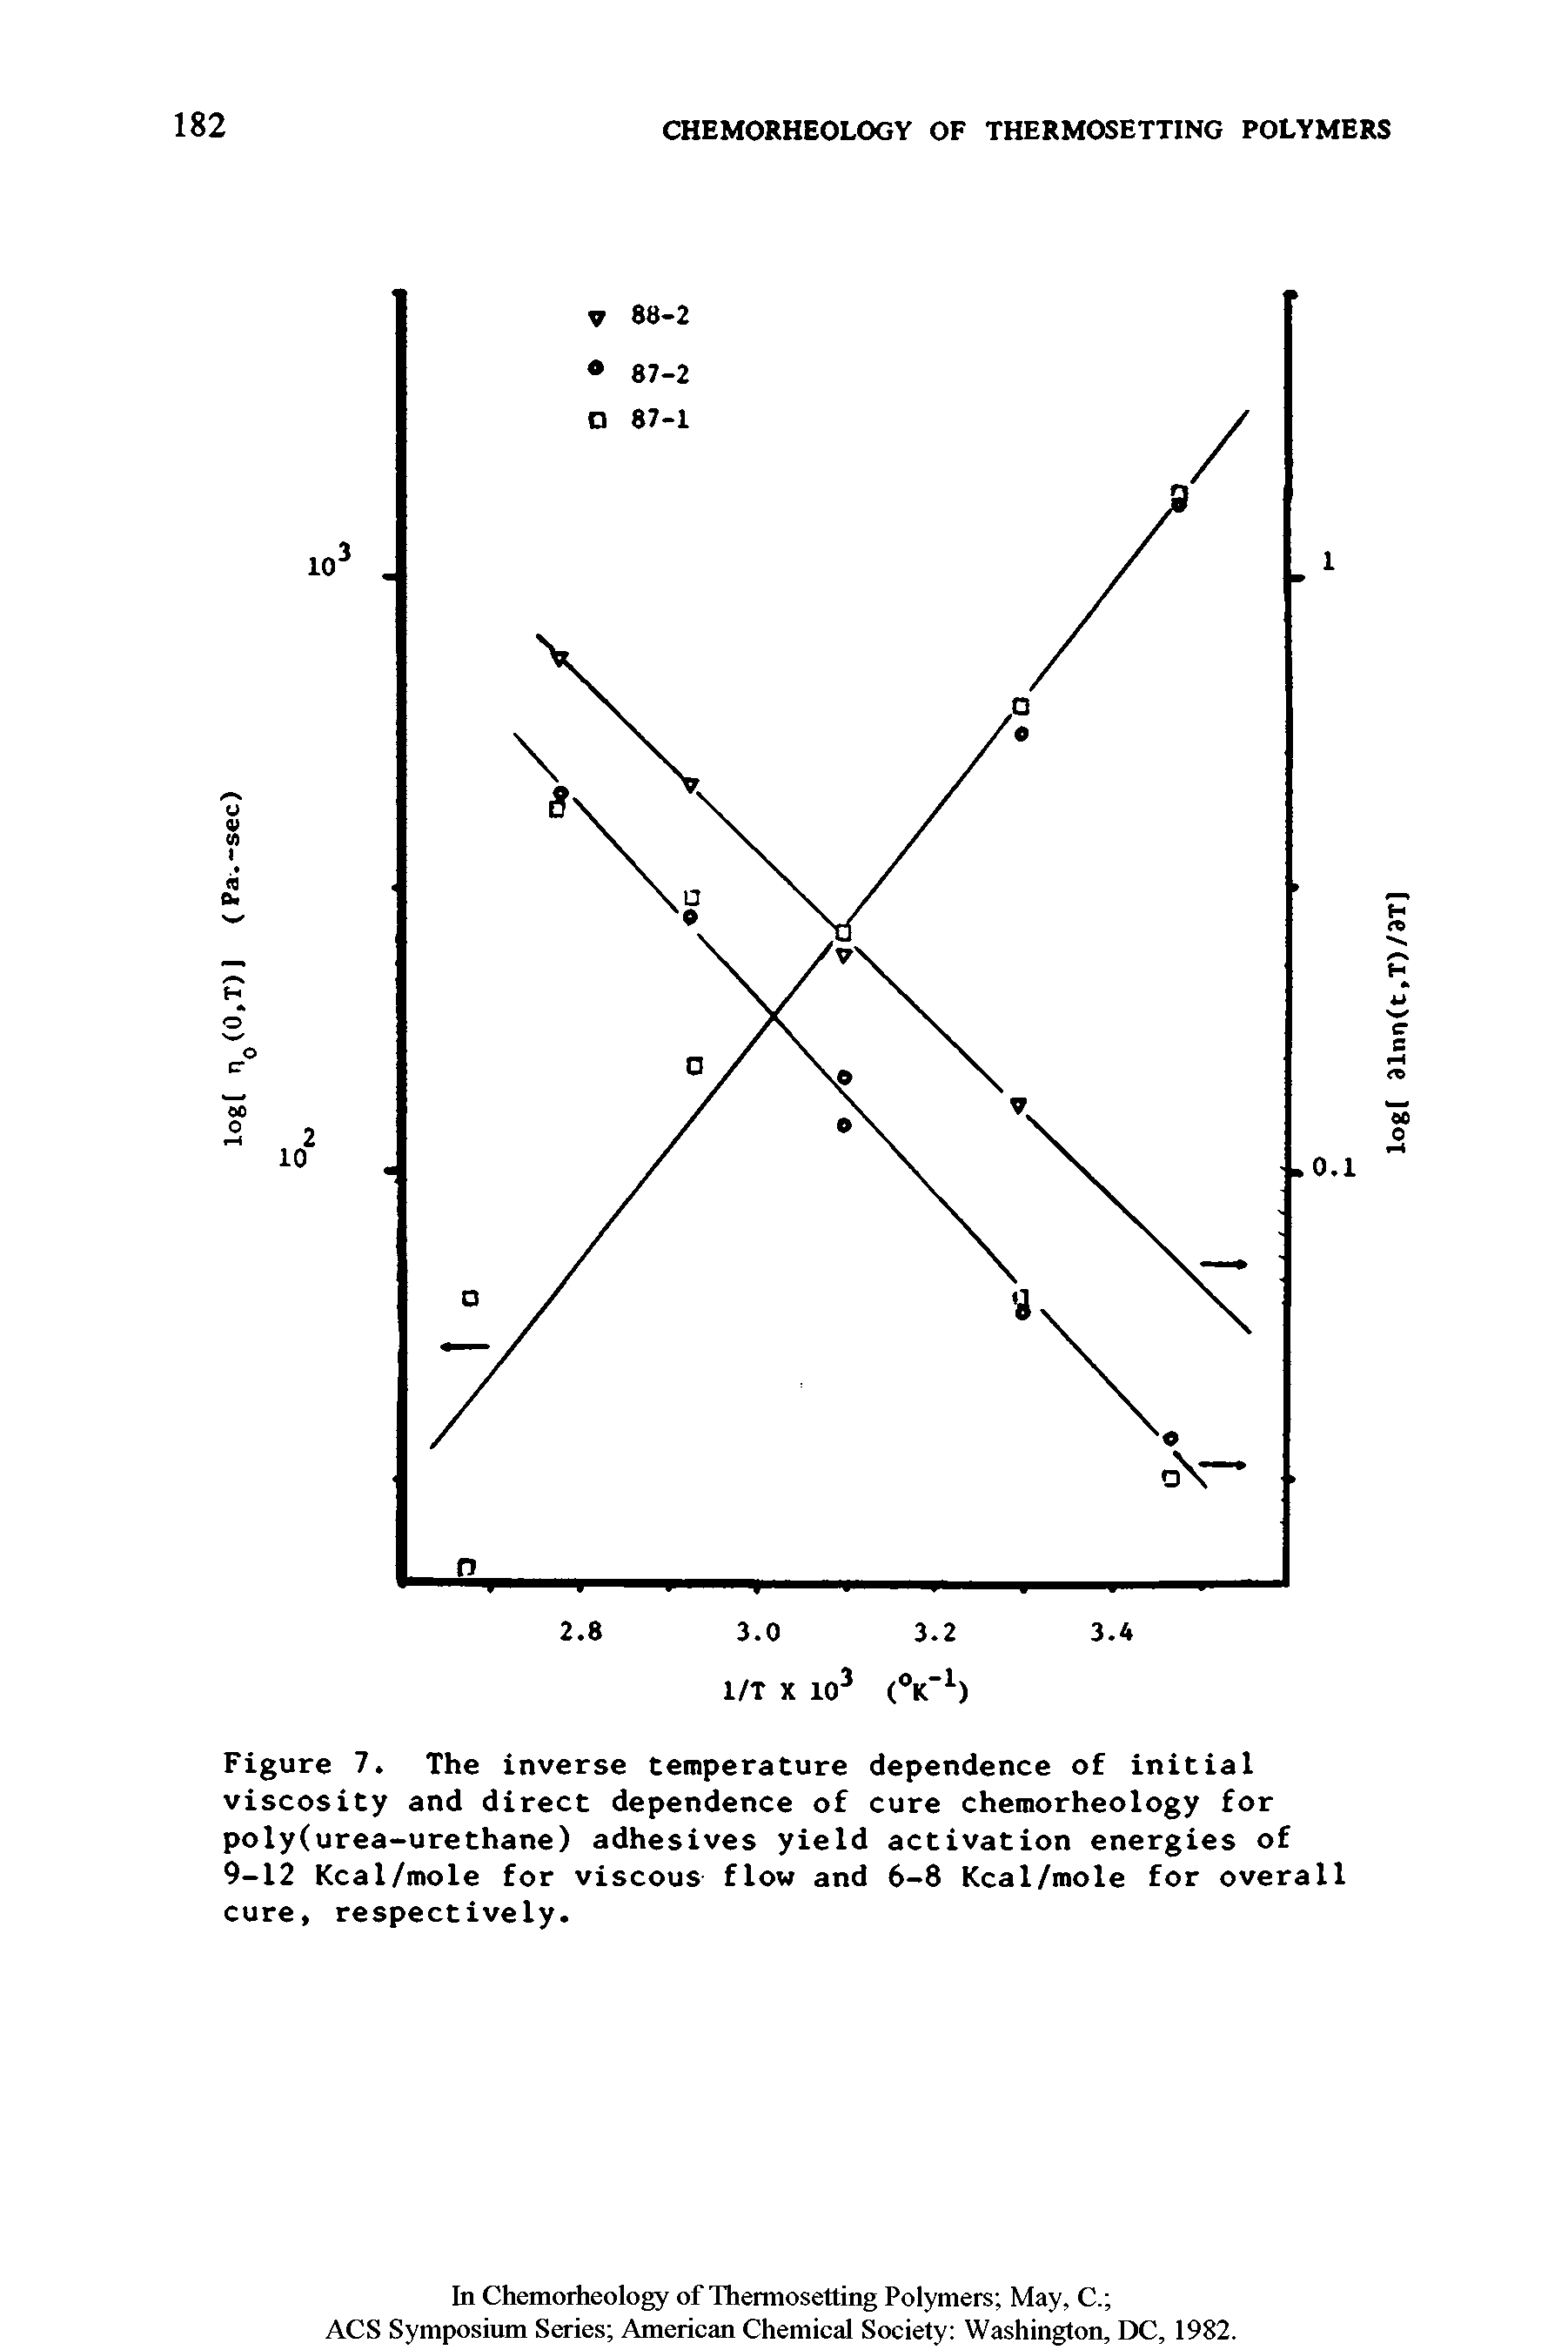 Figure 7. The inverse temperature dependence of initial viscosity and direct dependence of cure chemorheology for poly(urea-urethane) adhesives yield activation energies of 9-12 Kcal/mole for viscous flow and 6-8 Kcal/mole for overall cure, respectively.